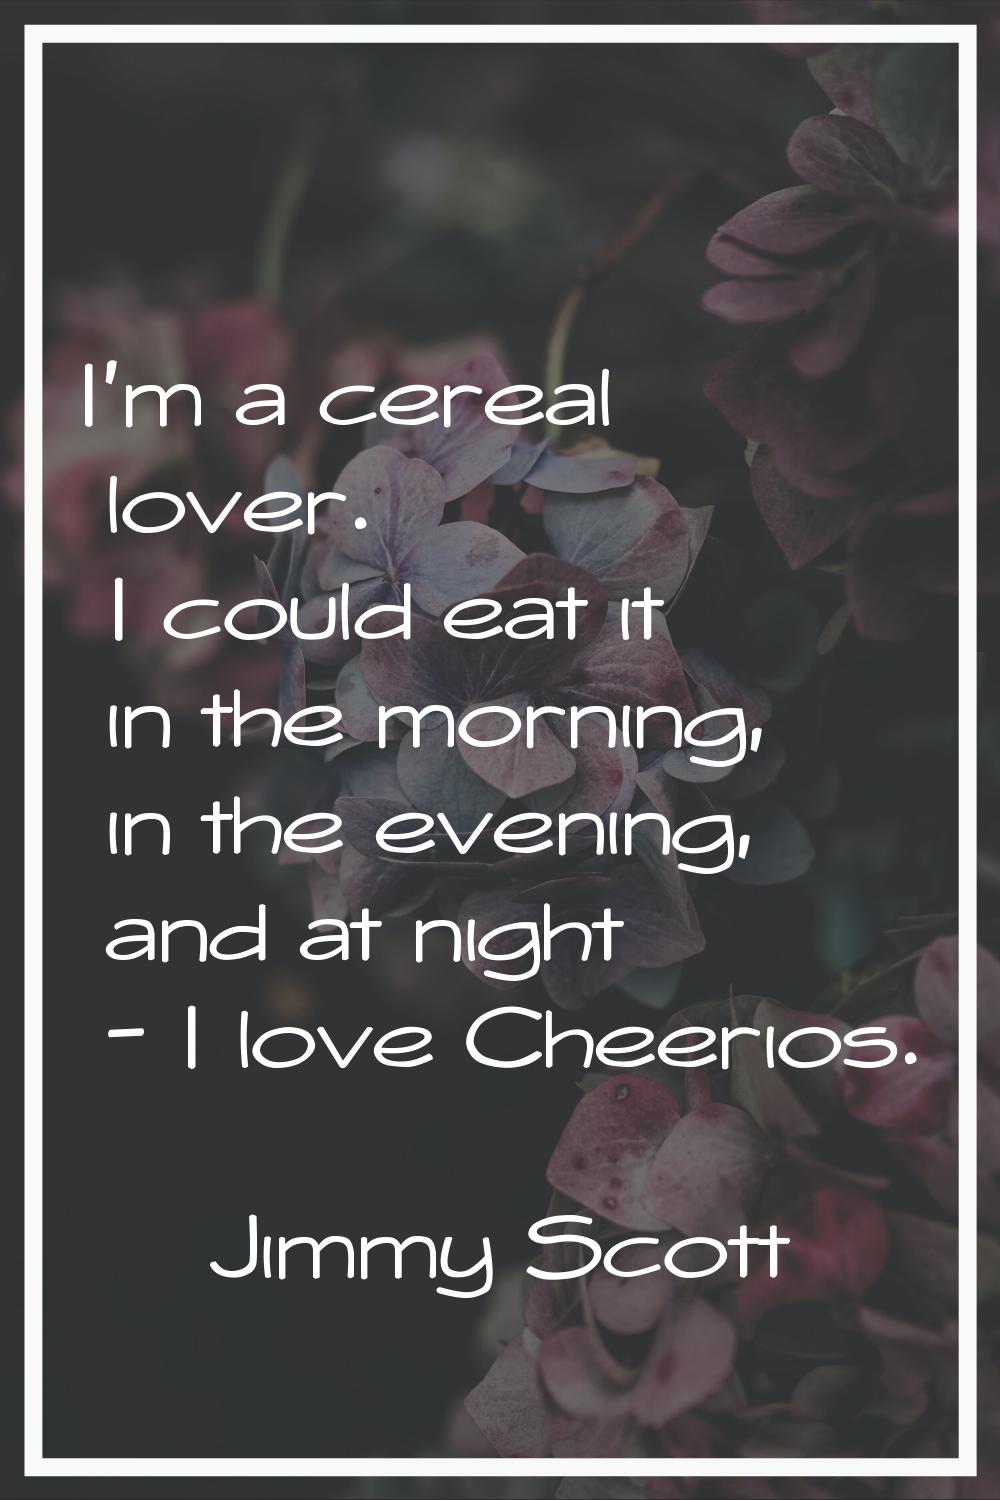 I'm a cereal lover. I could eat it in the morning, in the evening, and at night - I love Cheerios.